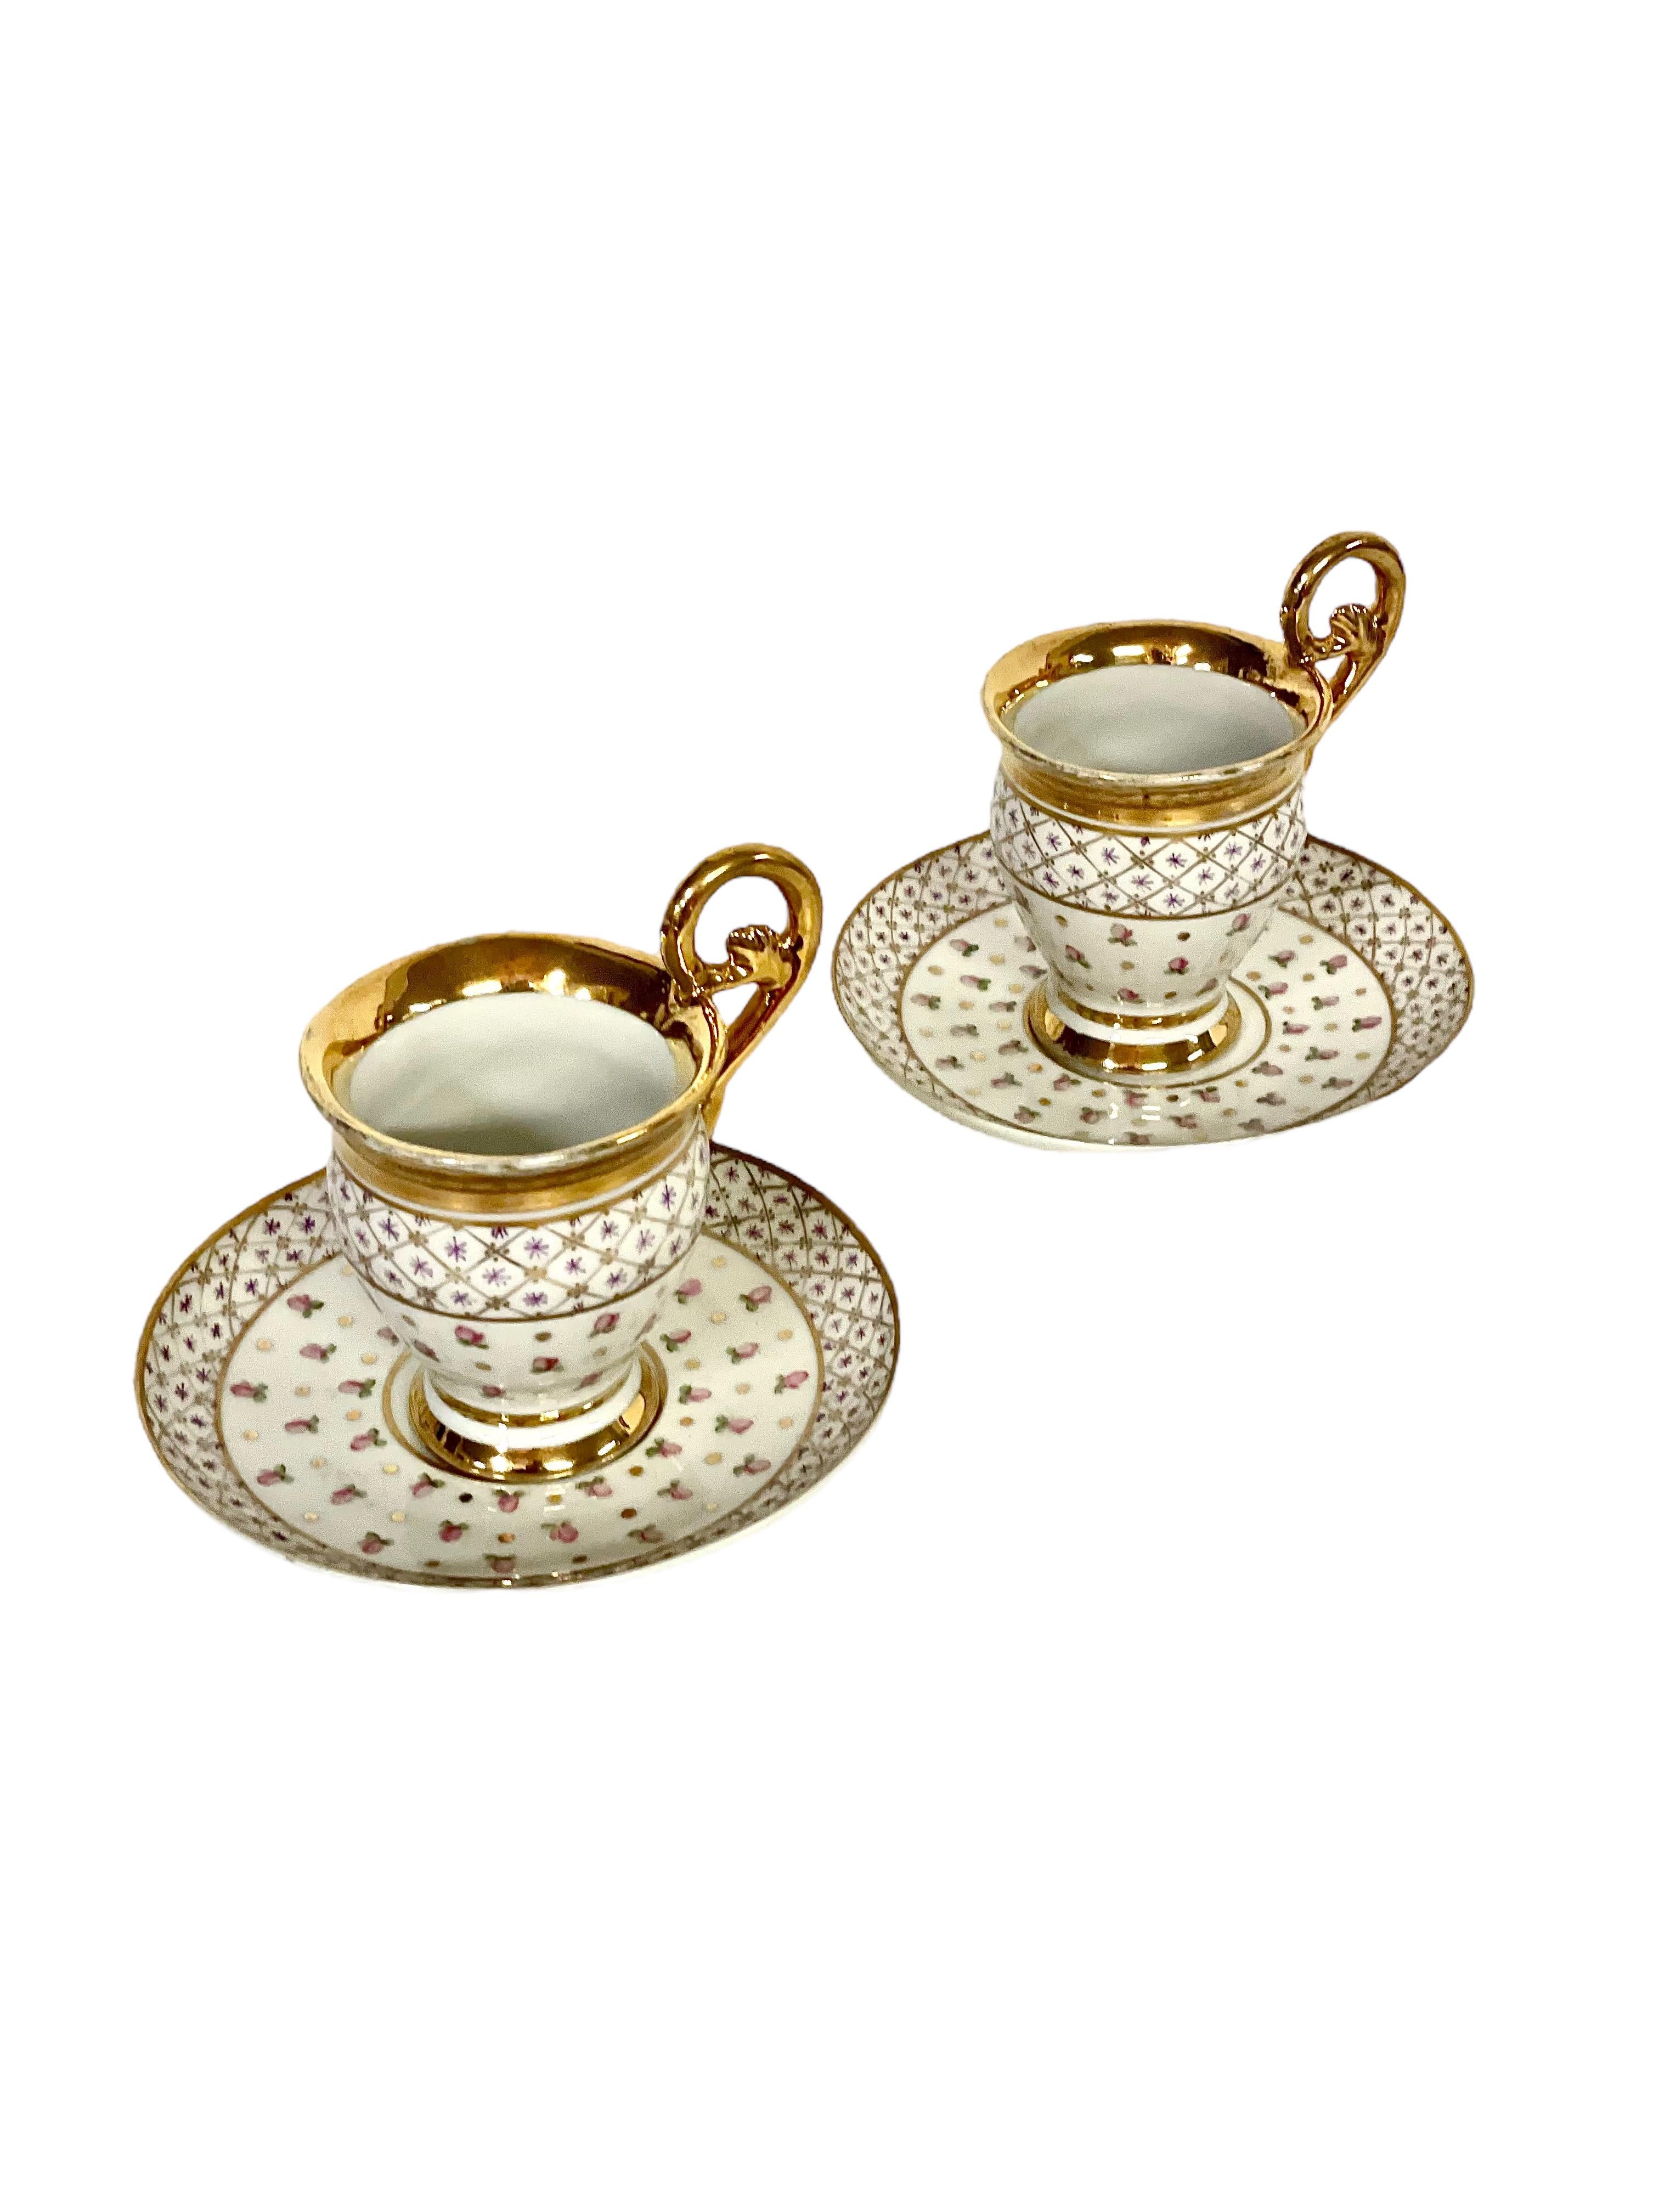 An exquisite pair of antique white 'Porcelaine de Paris' teacups and saucers, intricately hand- painted with gilt decoration throughout. Dating from the early 19th century, the cups have characteristically high, curved handles, which, like the cup